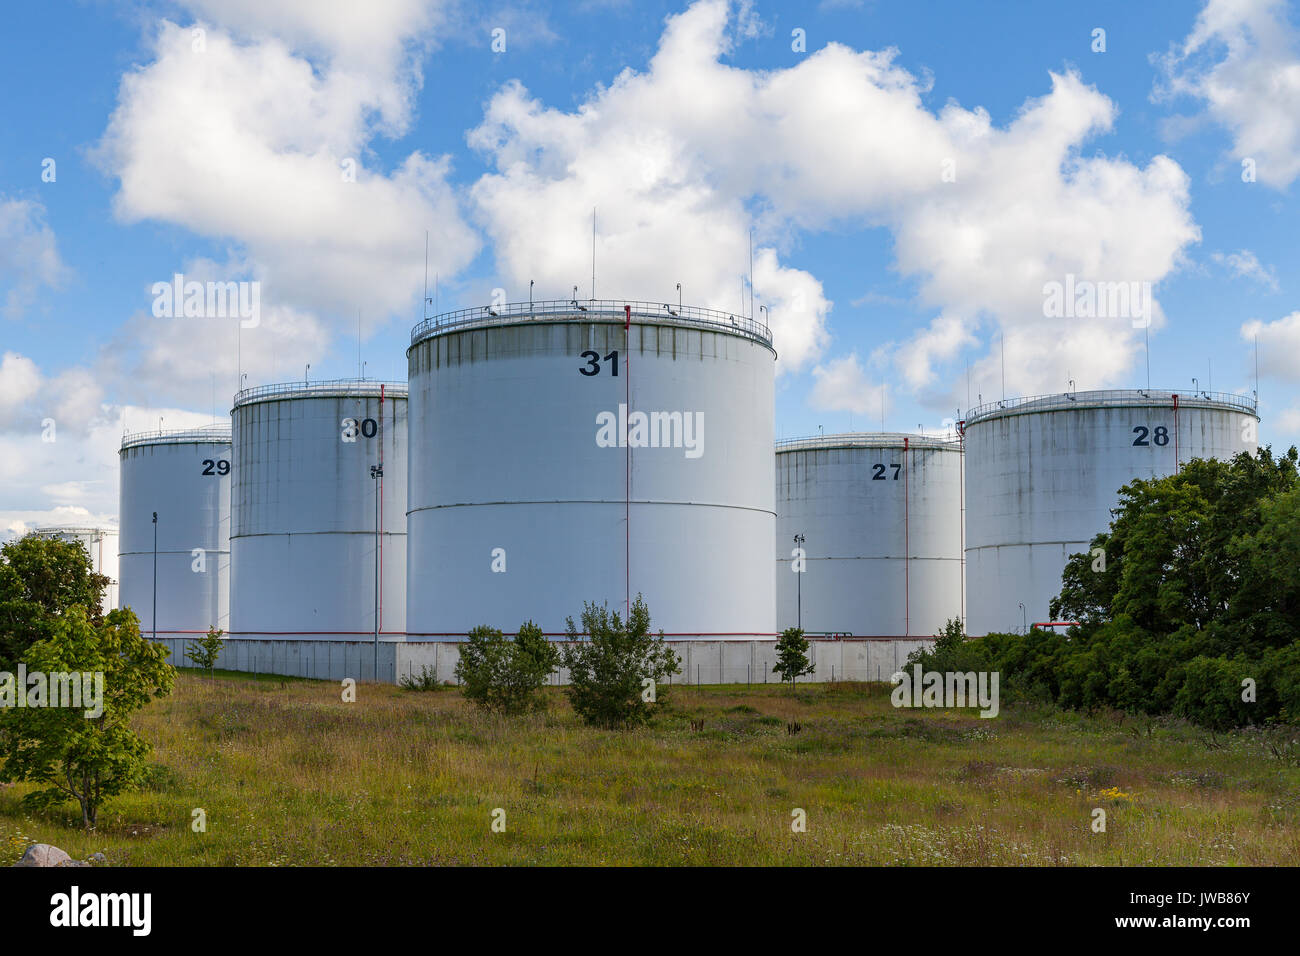 Silver oil tanks on the green grass field. Blue sky with clouds. Stock Photo